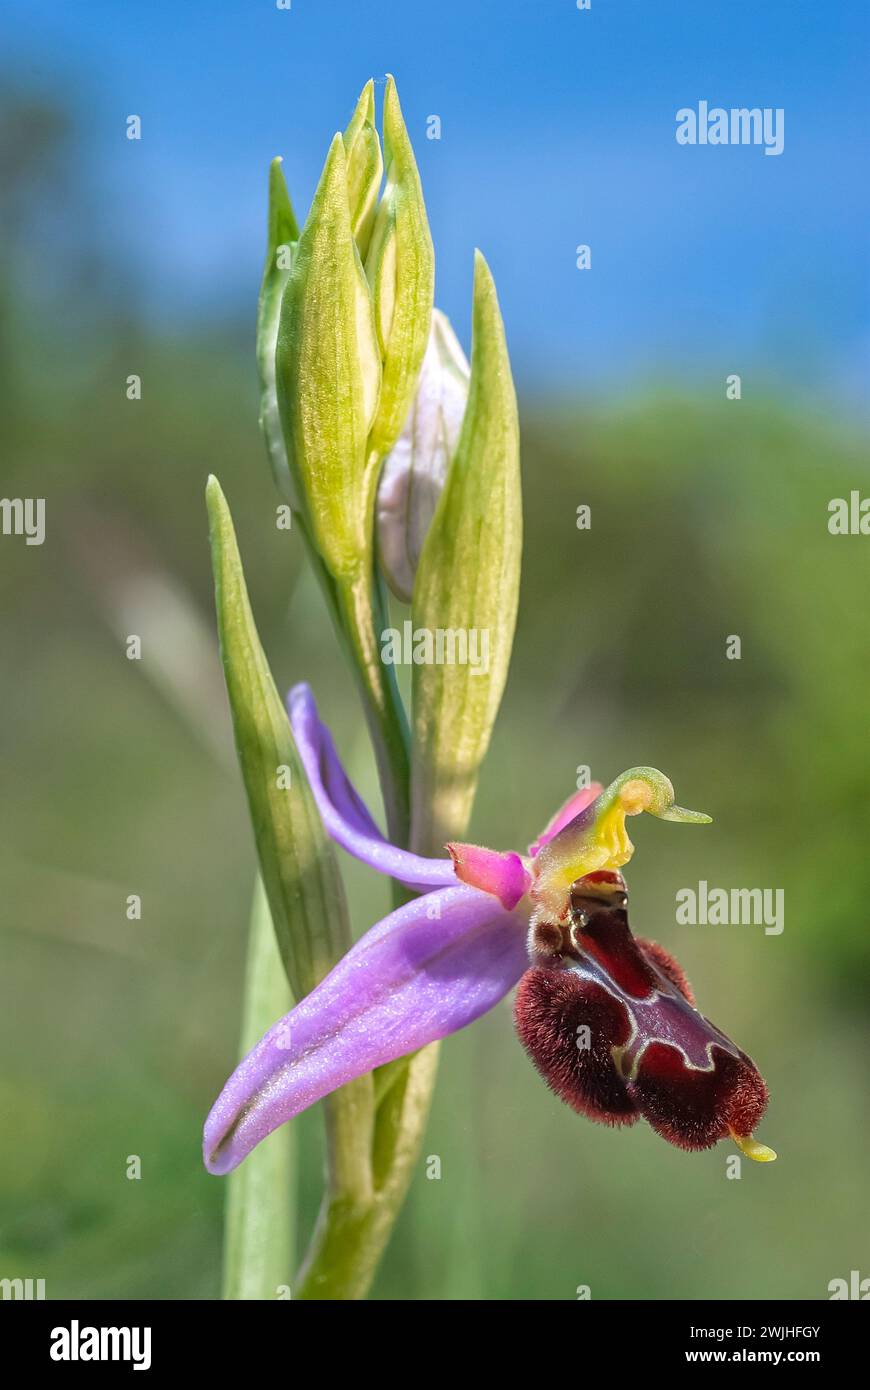 Ophrys xvespertilio (Ophrys apifera × Ophrys bertolonii), Orchidaceae. Natural hybrid. Wild european orchid. Rare plant. Italy, Tuscany. Stock Photo